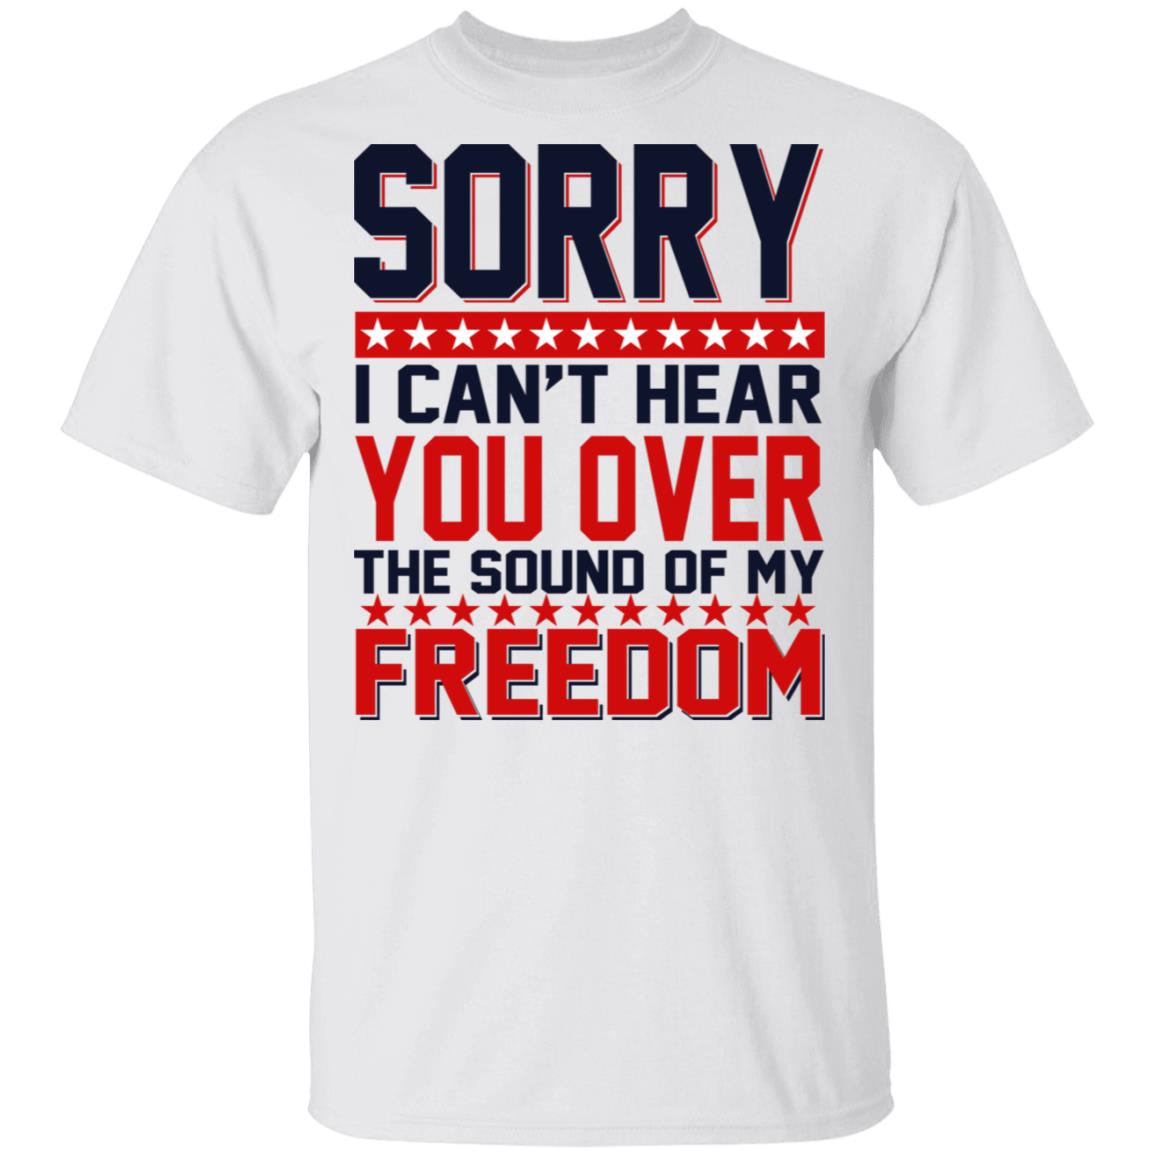 Sorry-I-Cant-Hear-You-Over-The-Sound-Of-My-Freedom-Shirt.jpg